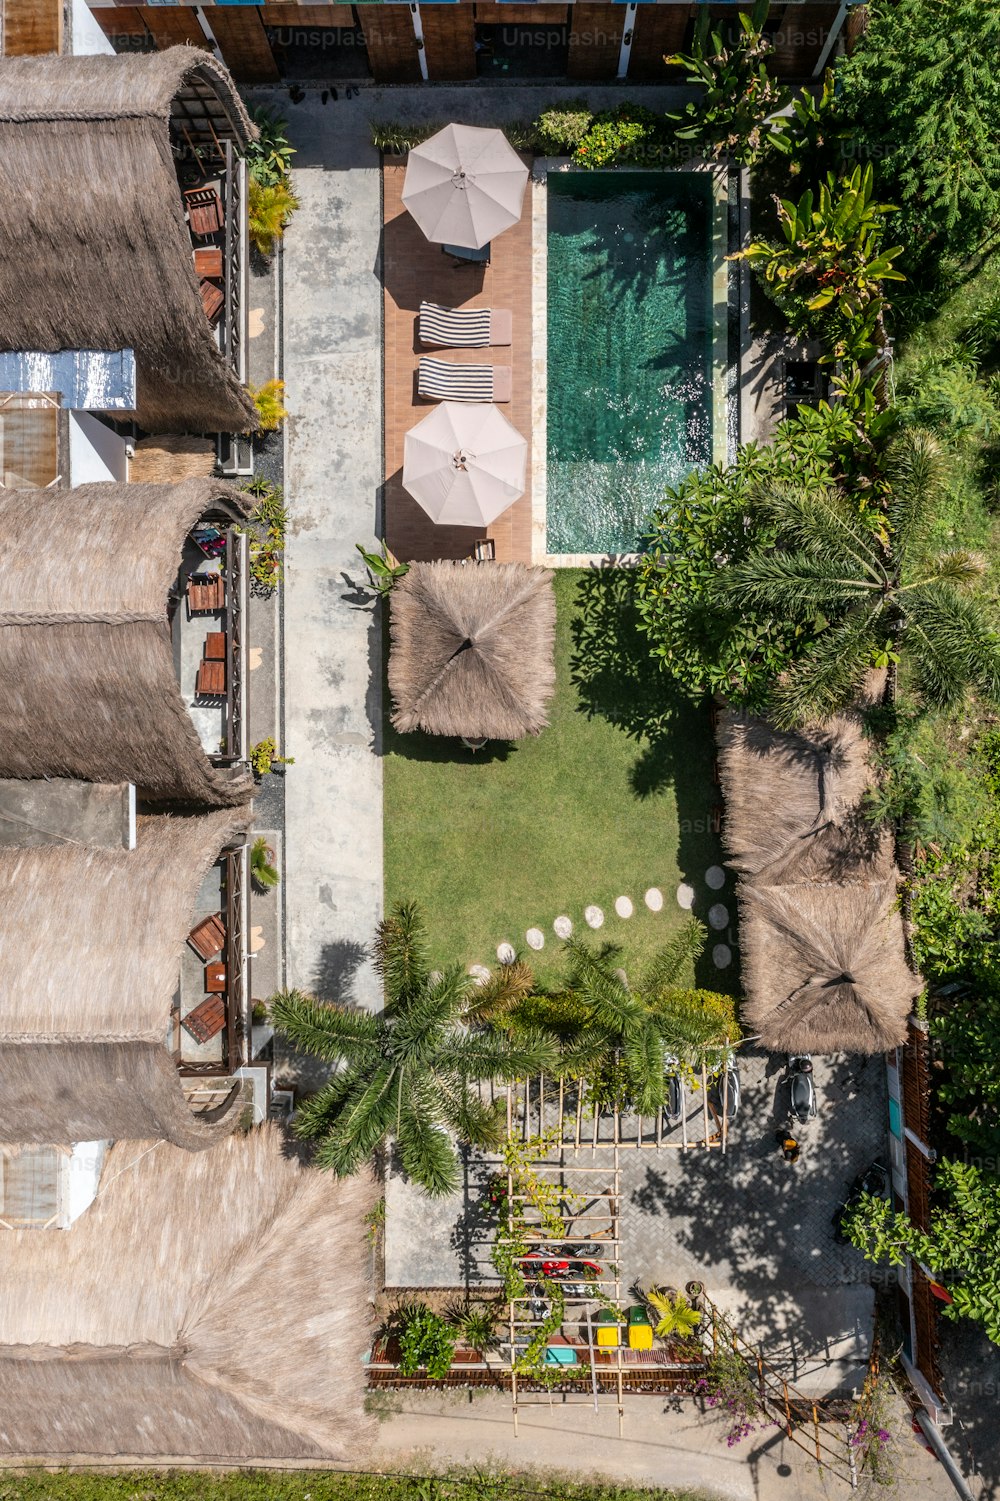 an aerial view of a house with umbrellas